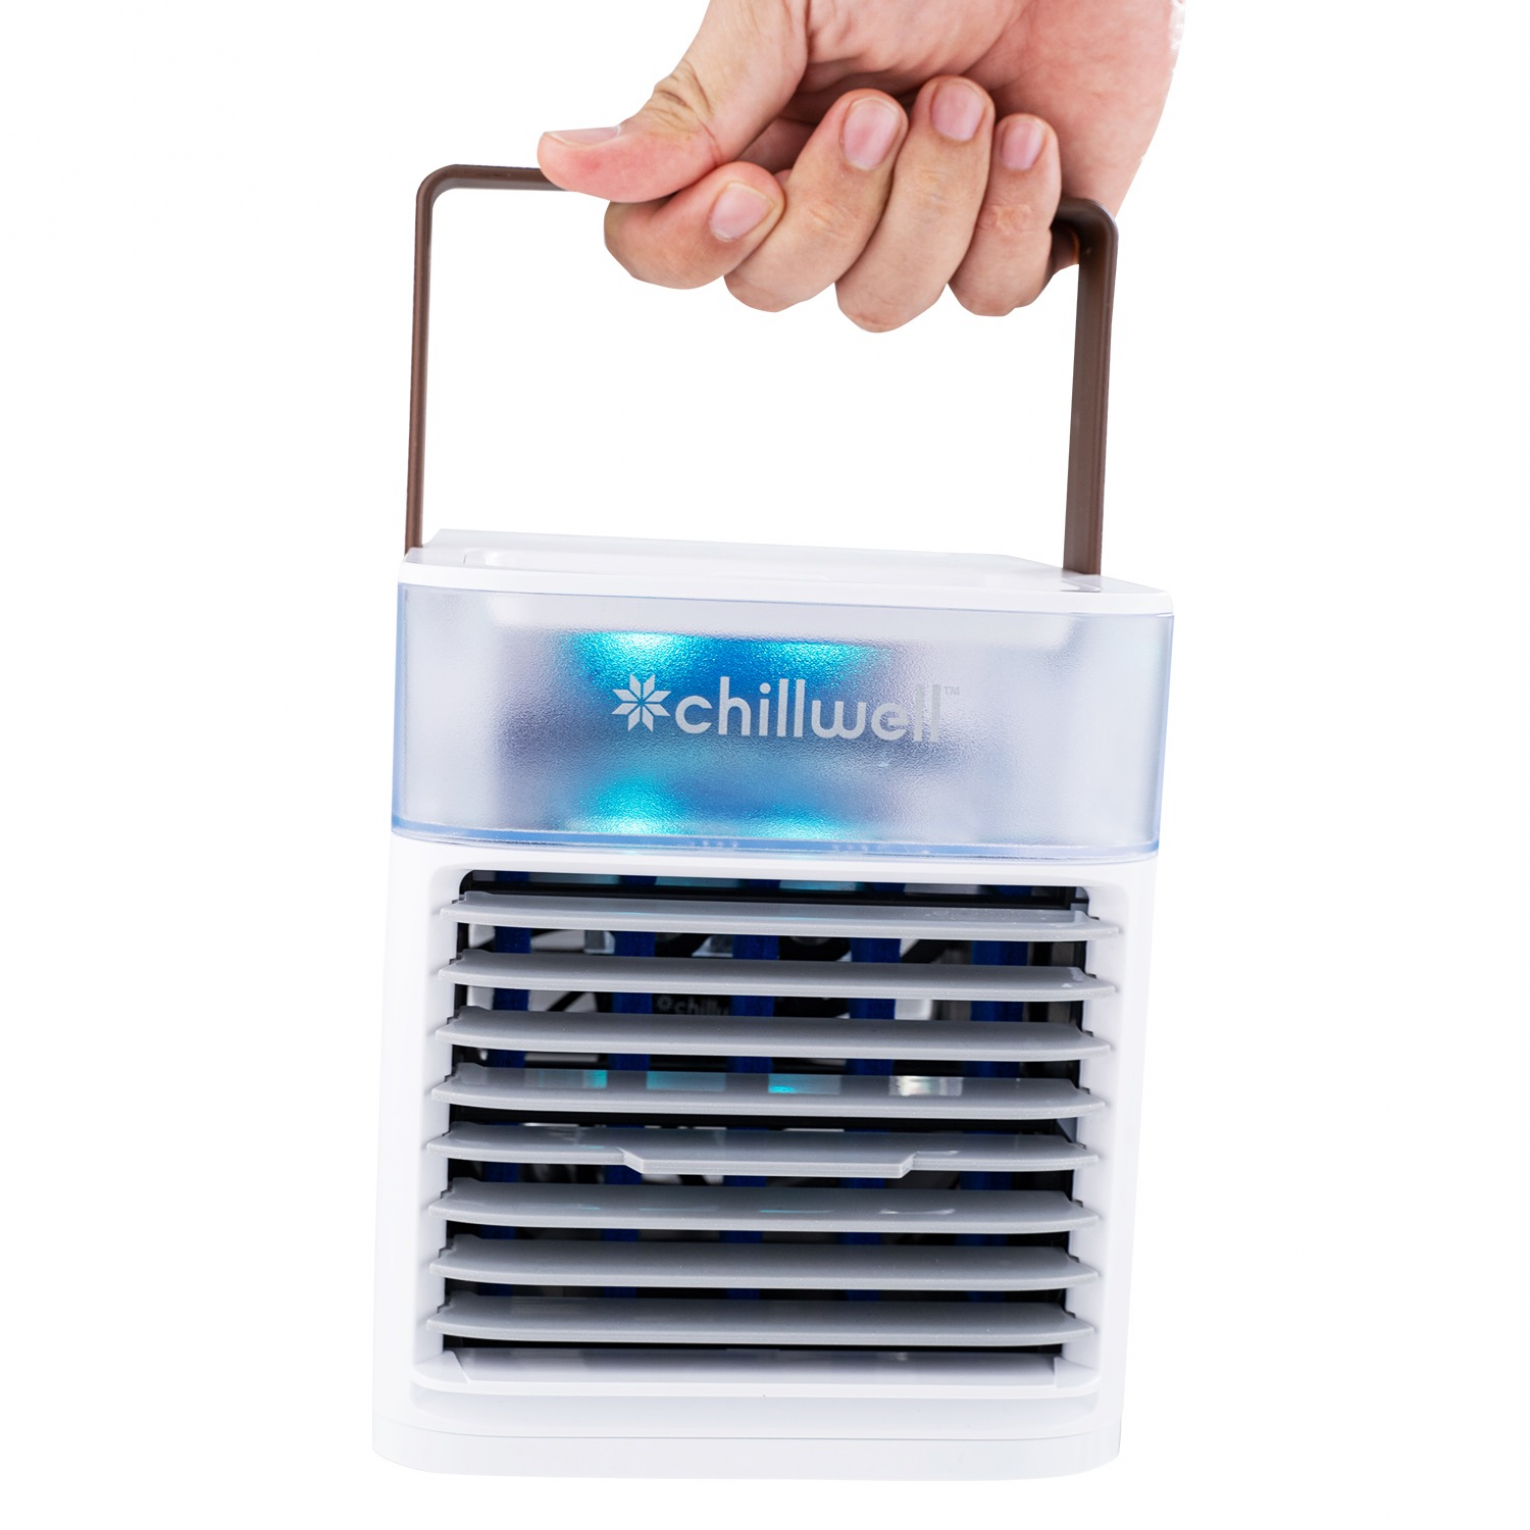 Chillwell AC Air Conditioning